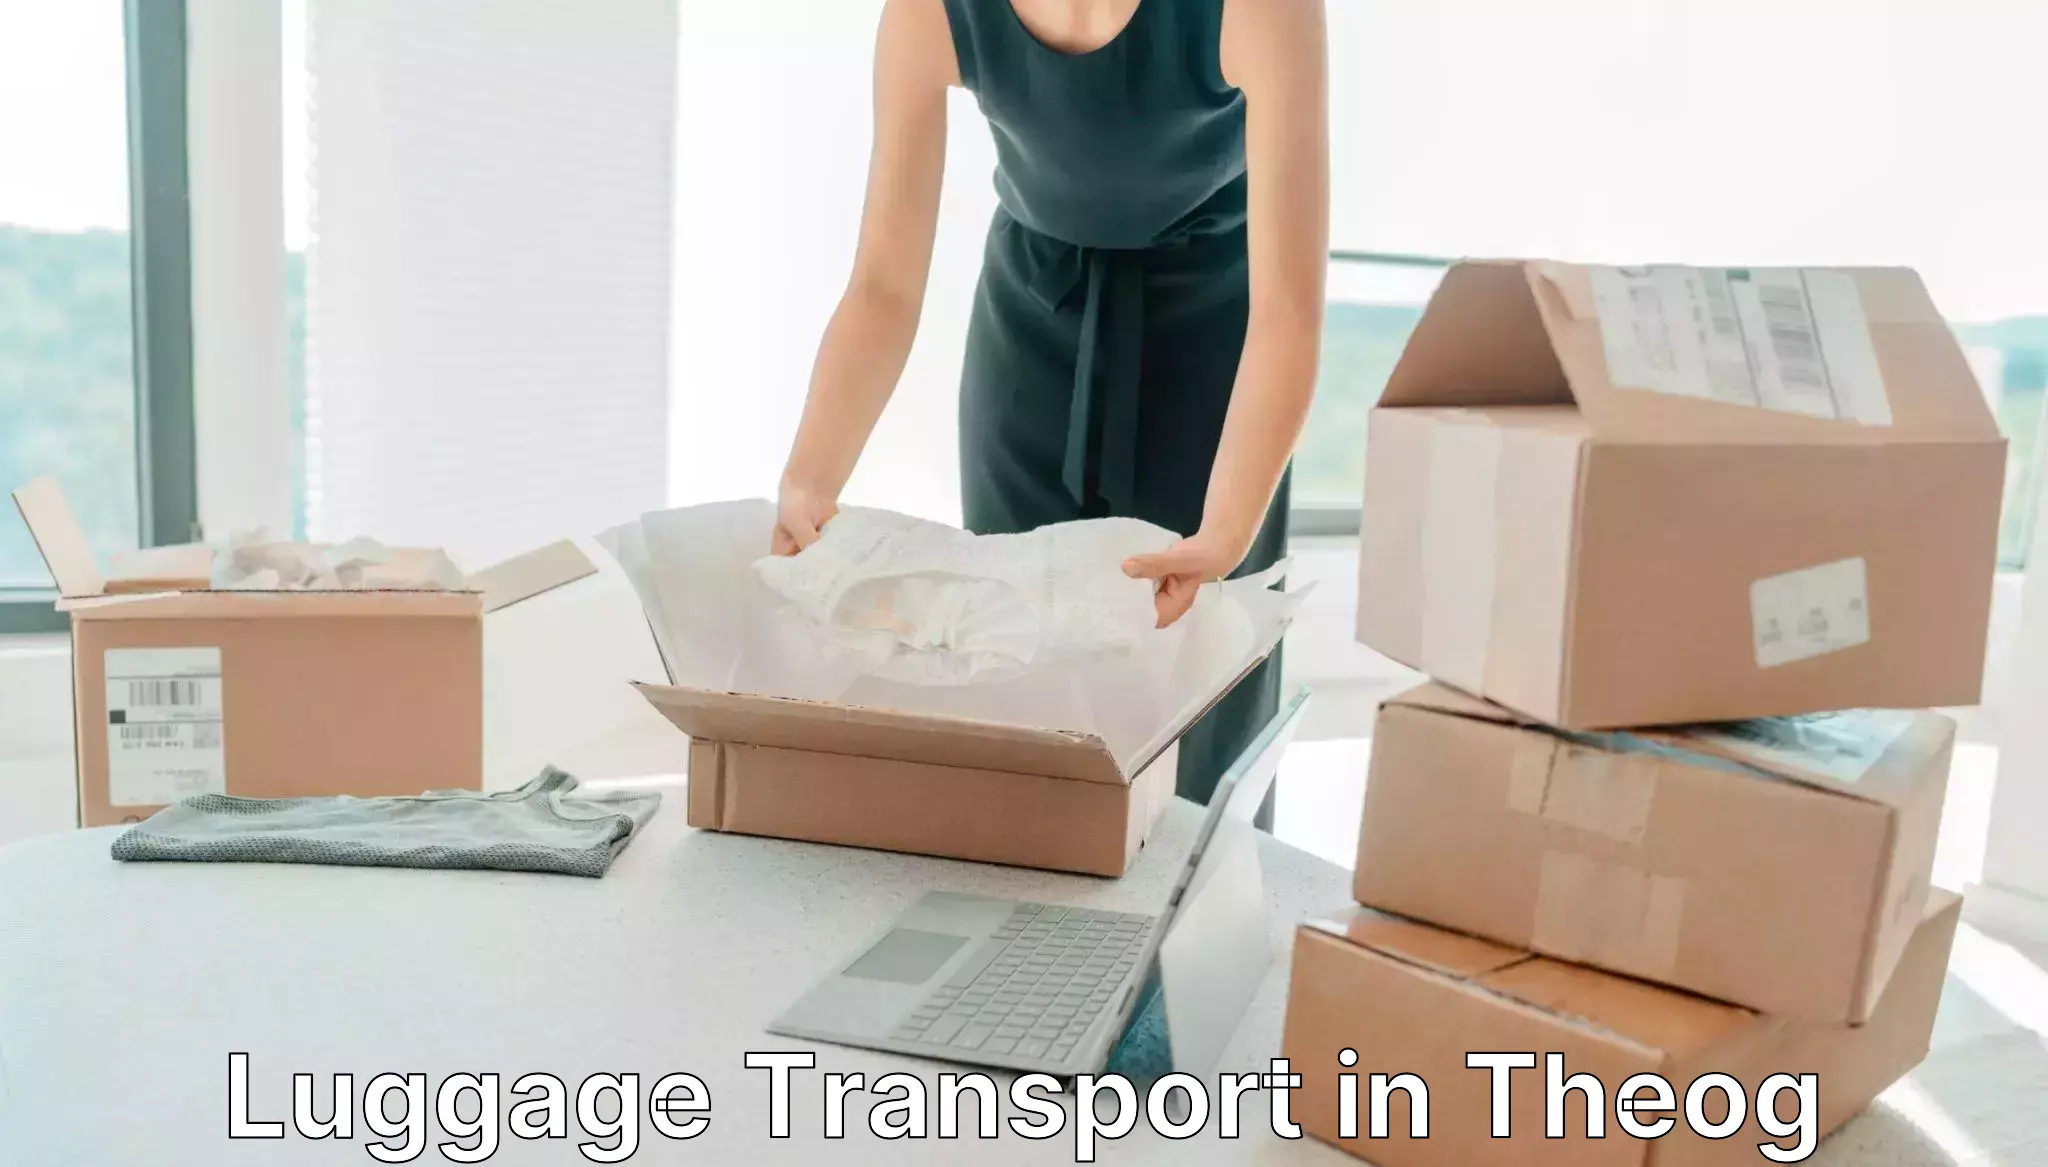 Luggage transport consulting in Theog